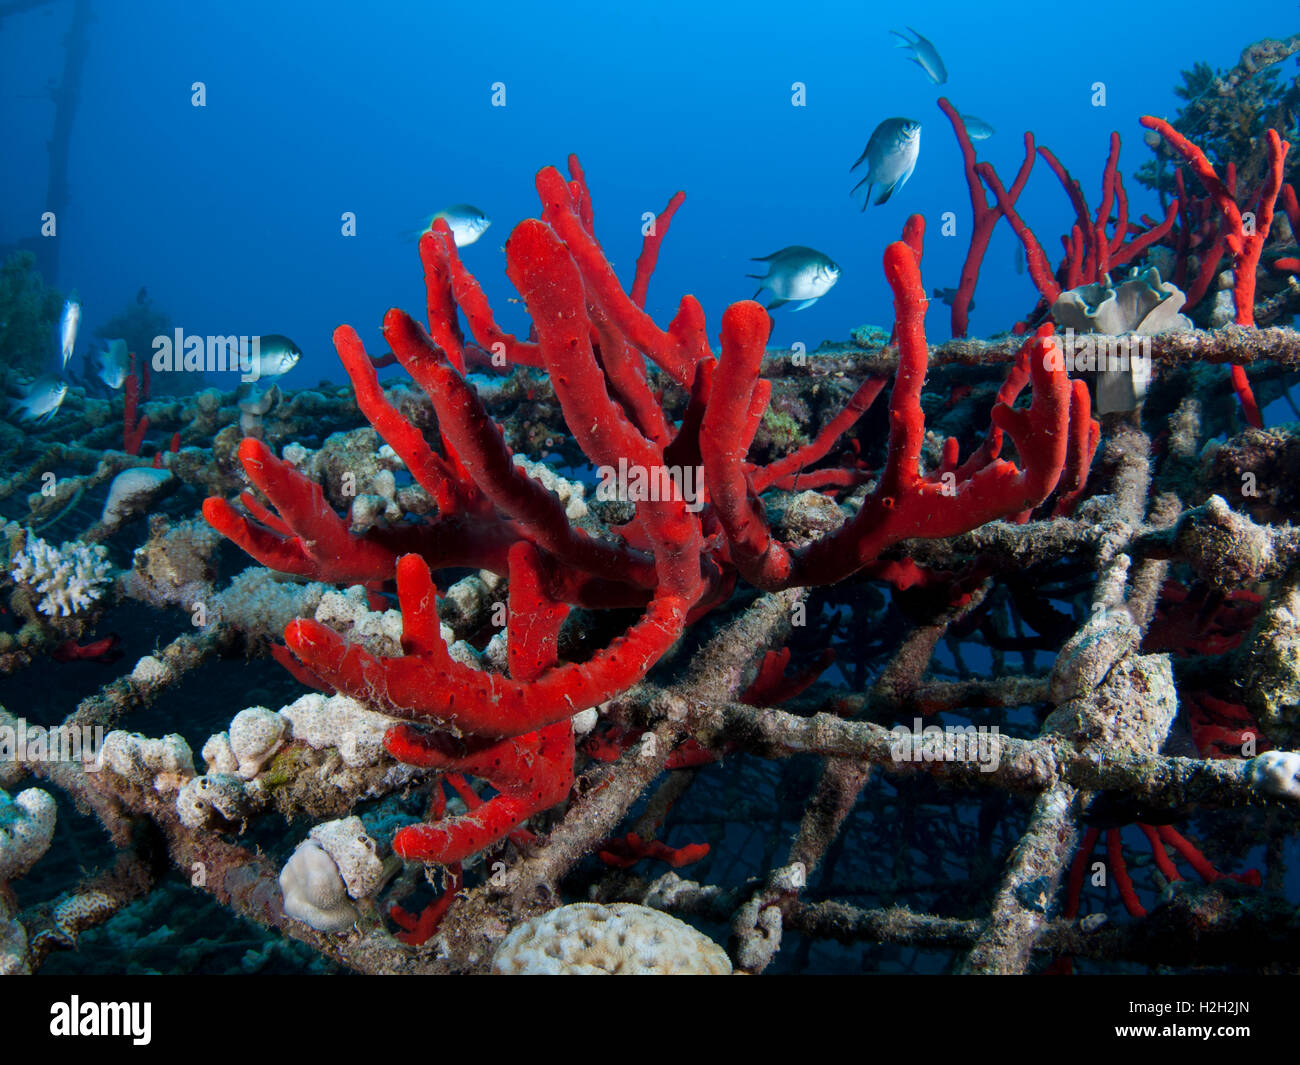 Fish swim near Magnificent Fire Sponge, (Latrunculia magnifica) growing on the protective netting. Photographed in the military Stock Photo